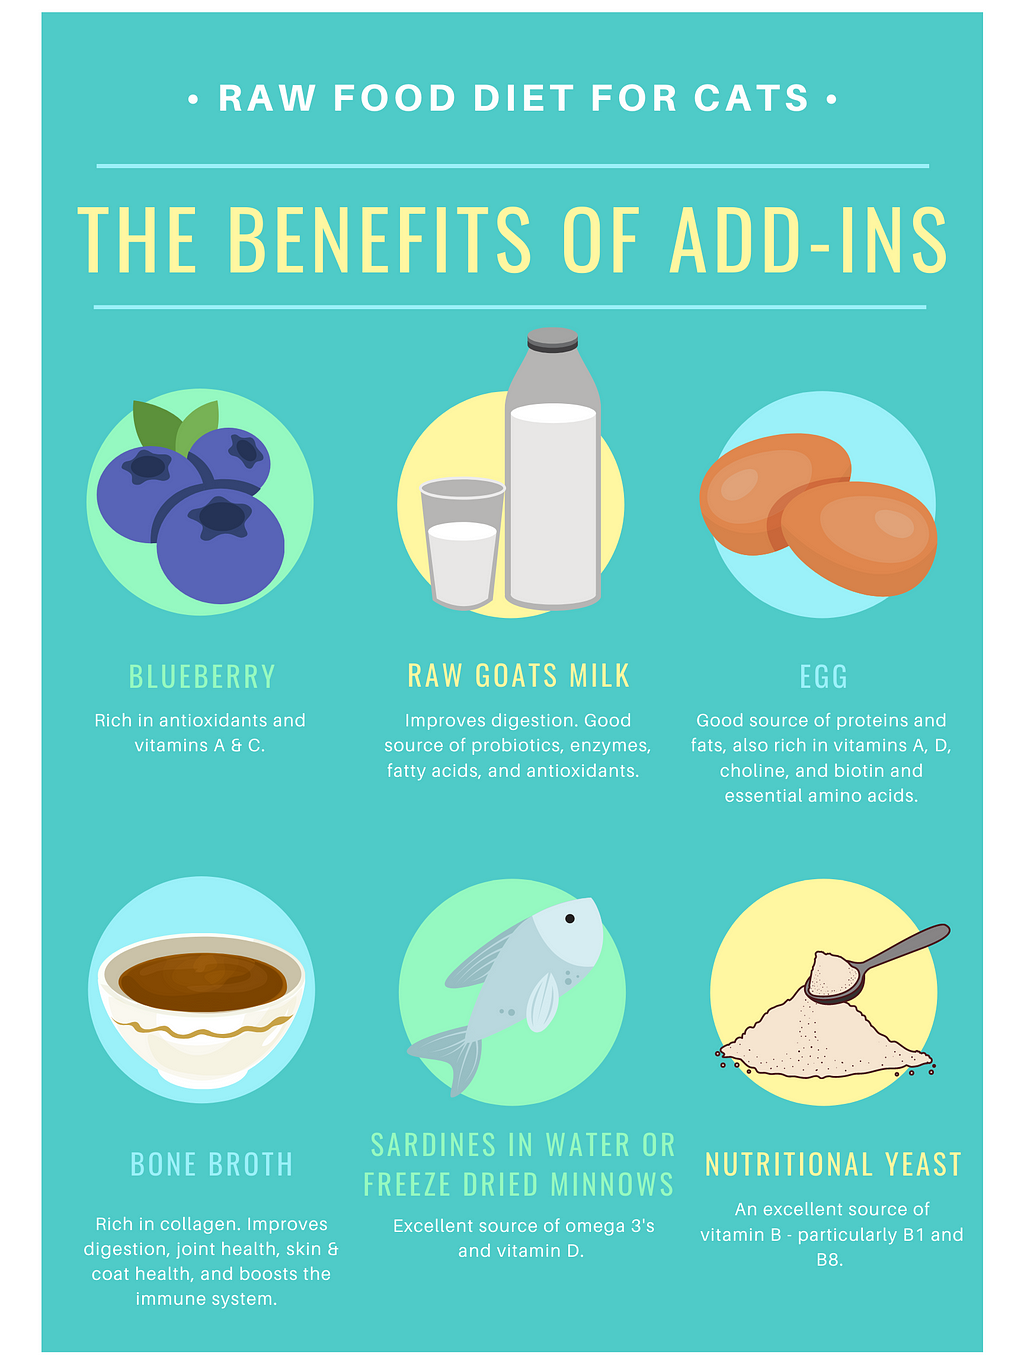 A diagram of healthy add-ins and their benefits.